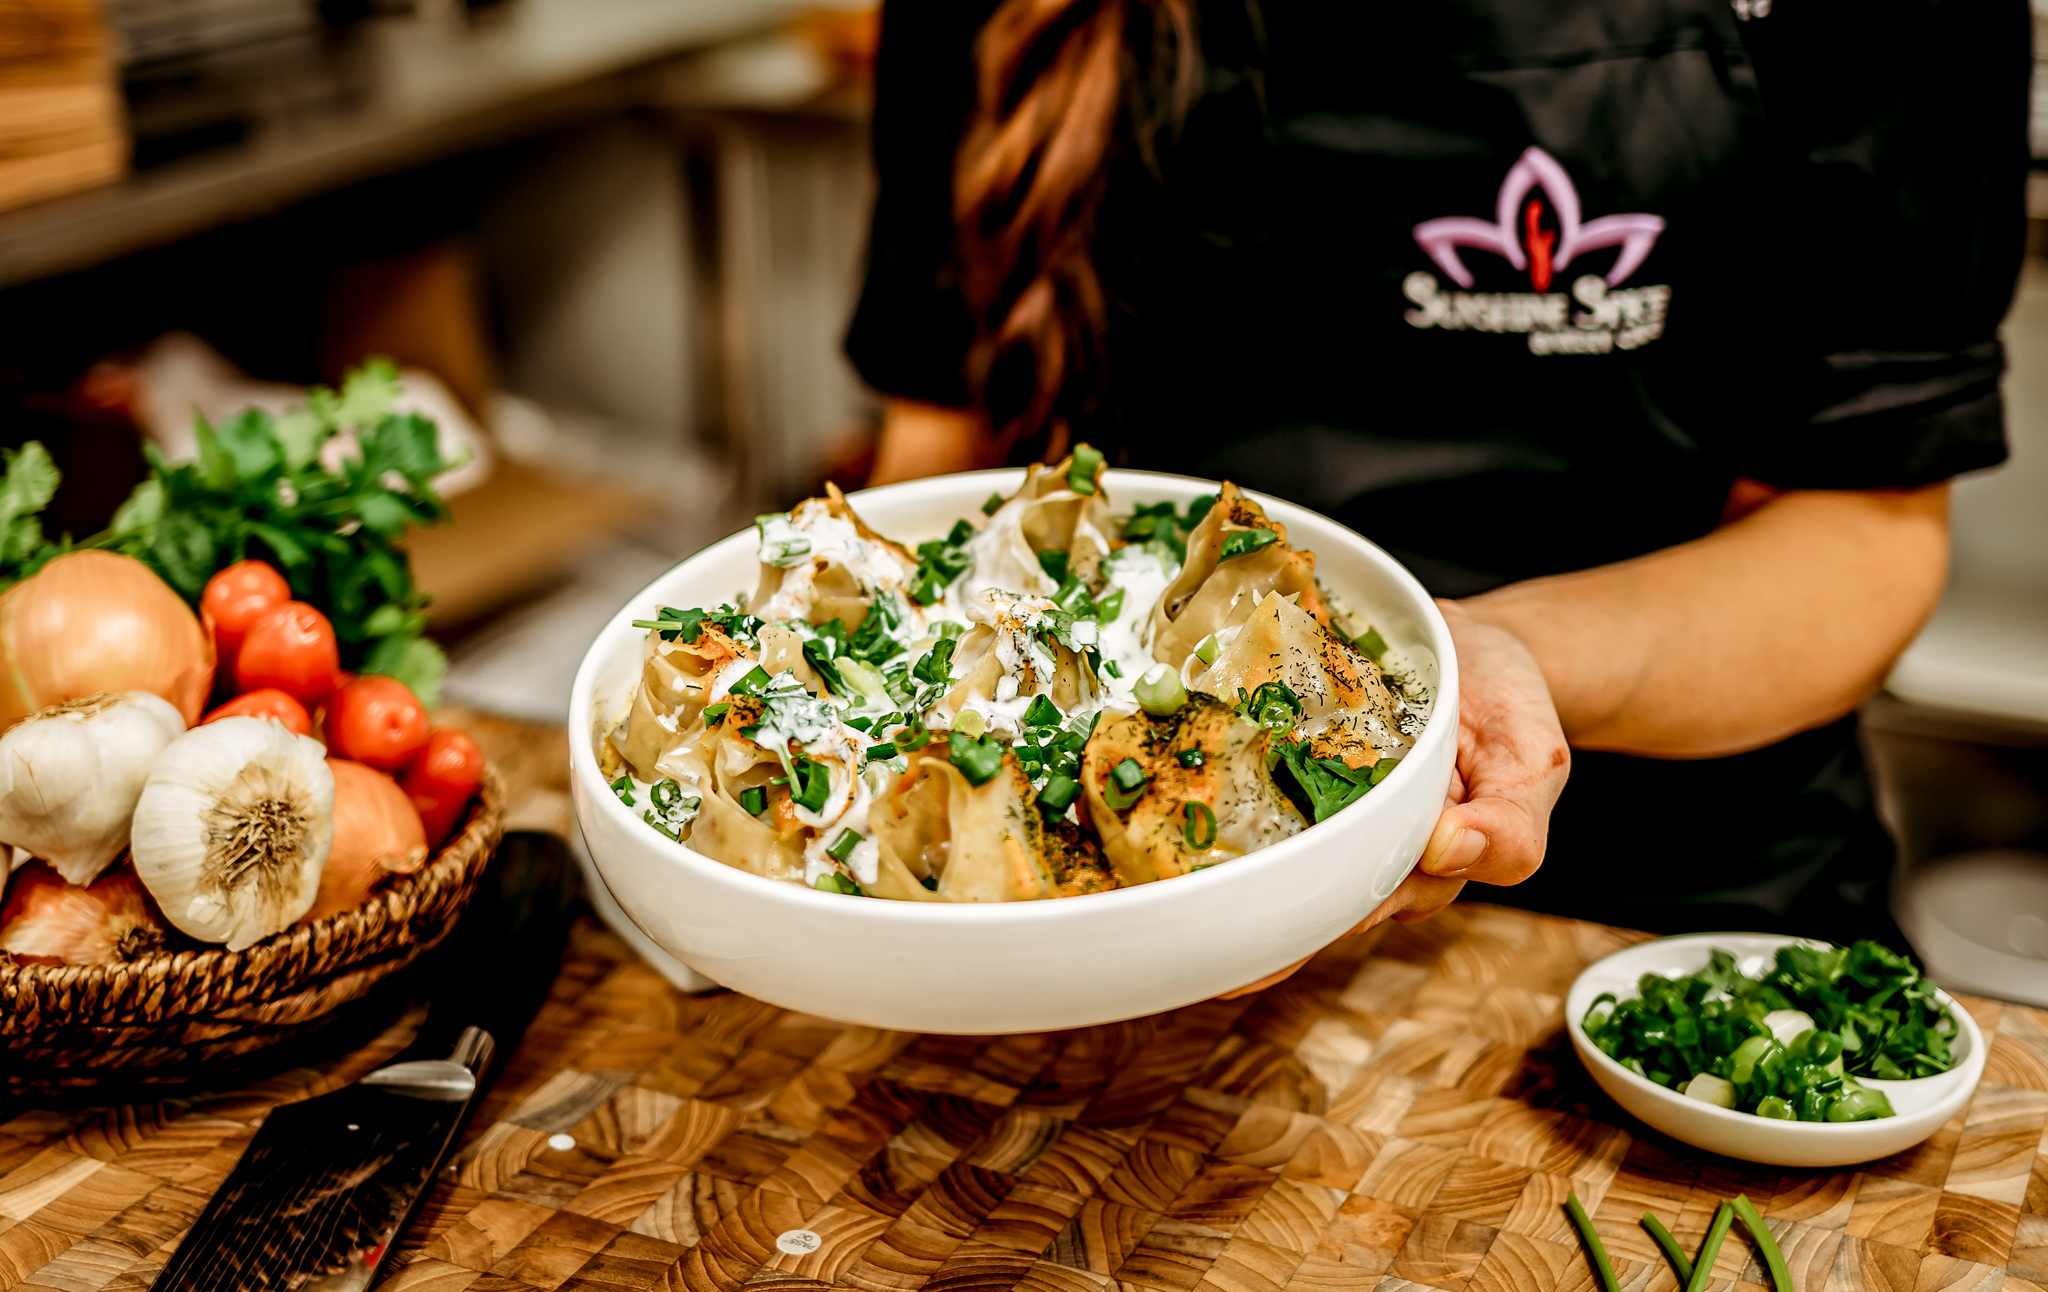 A server holds a bowl of dumplings topped with cream, shopped scallions, and herbs.